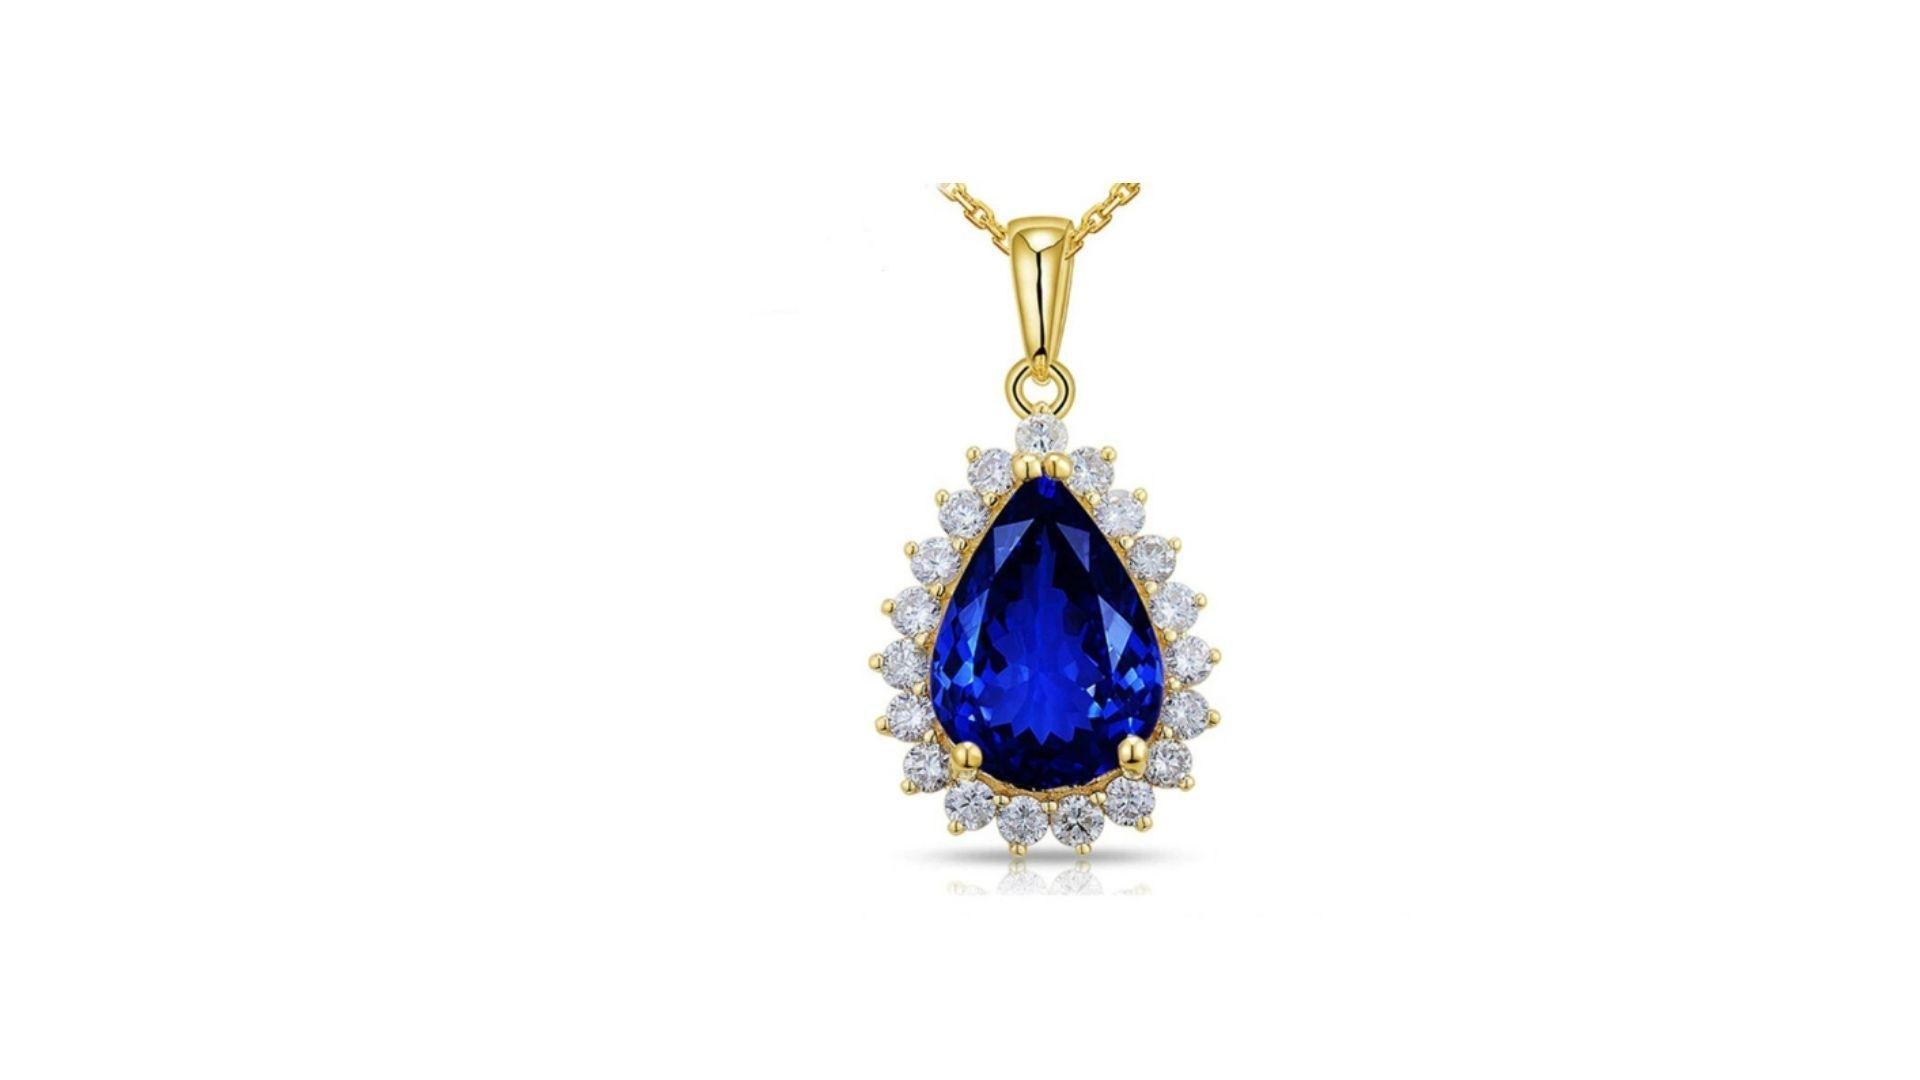 
TANZANITE DIAMOND NECKLACE 14K YELLOW GOLD


THIS IS A WOW FACTOR WHEN IT COMES TO TANZANITES WITH JUST 5.10 CARATS YOU GET A TRULY SPECTACULAR NECKLACE WHICH MAKES THIS VERY RARE AND UNIQUE.



Diamonds: Natural Diamonds
Carat Weight: 0.96ct
Cut: